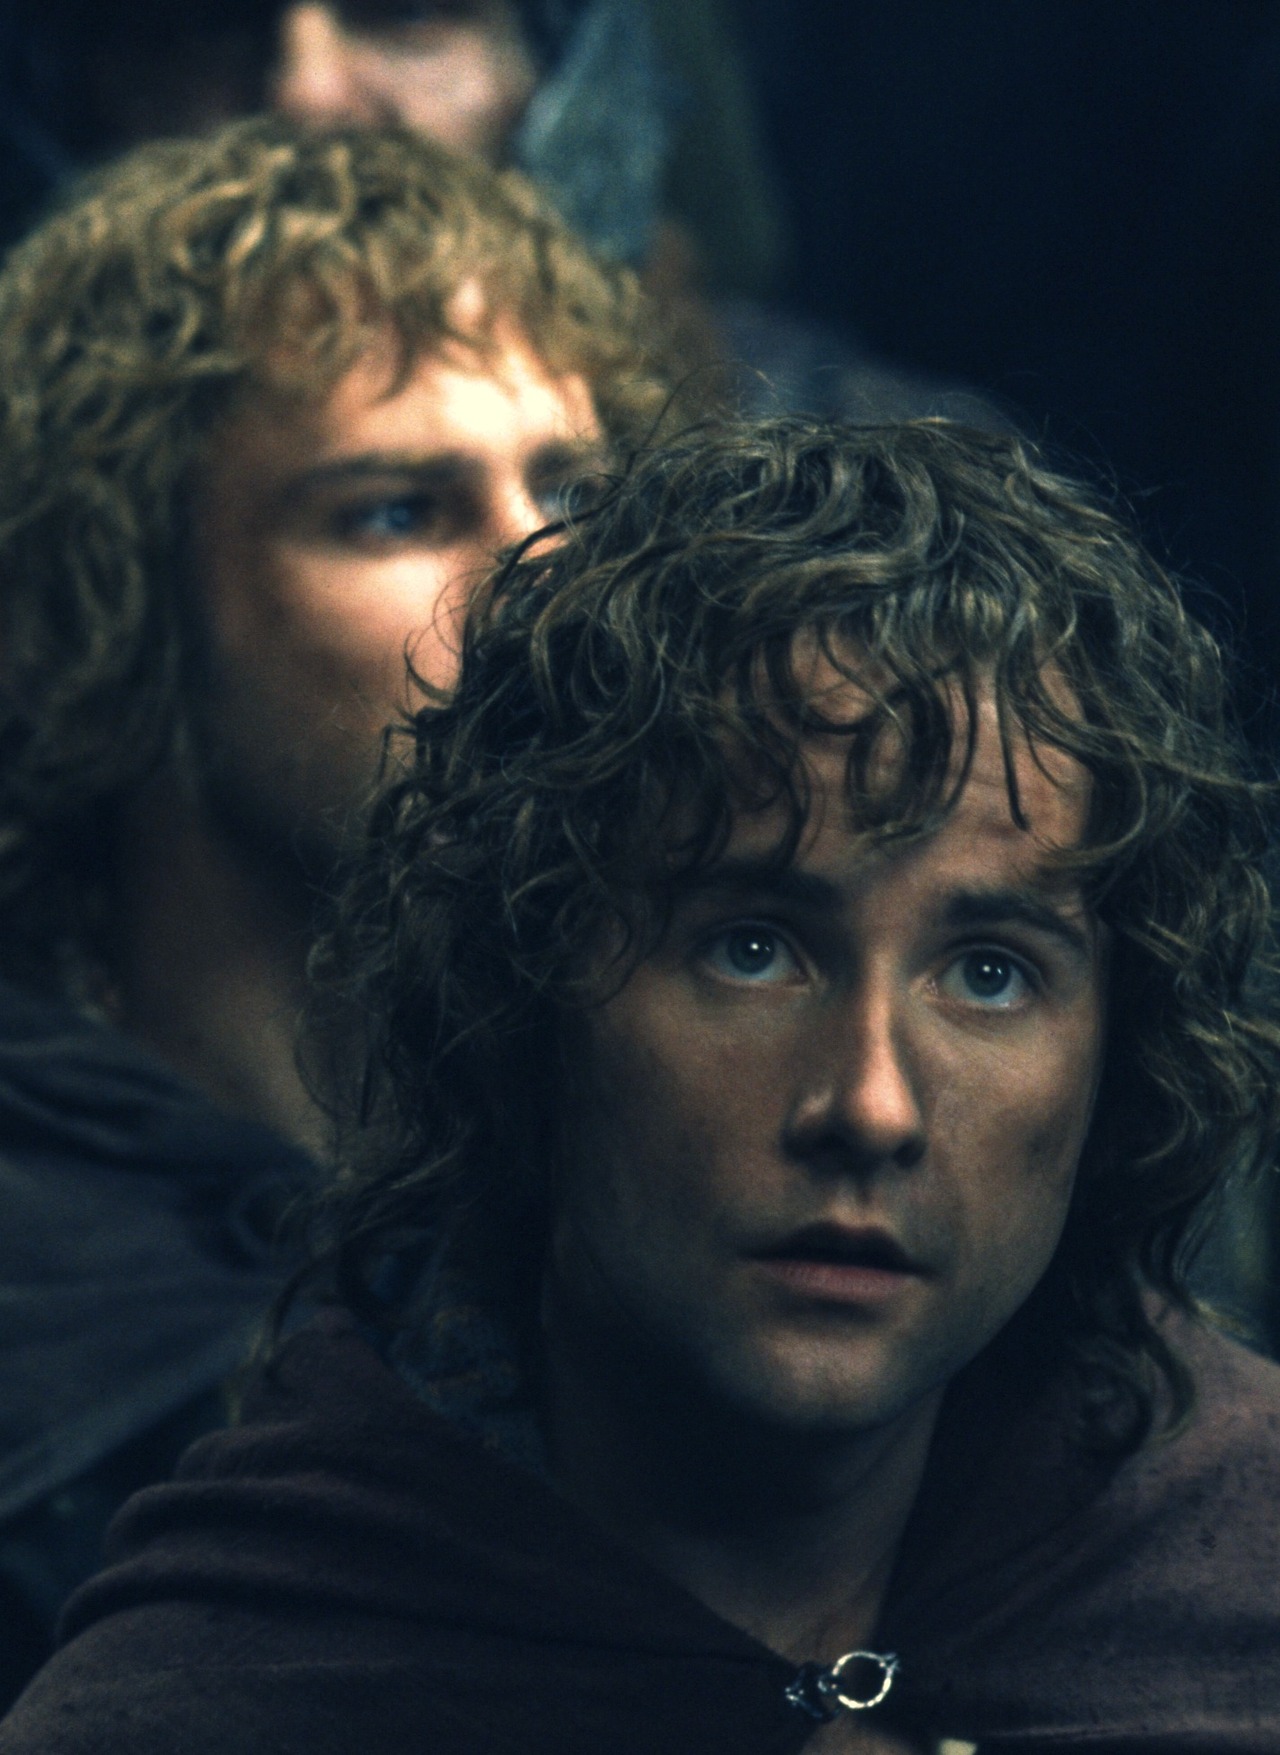 lotr-lord-of-the-rings-photo-32809064-fanpop